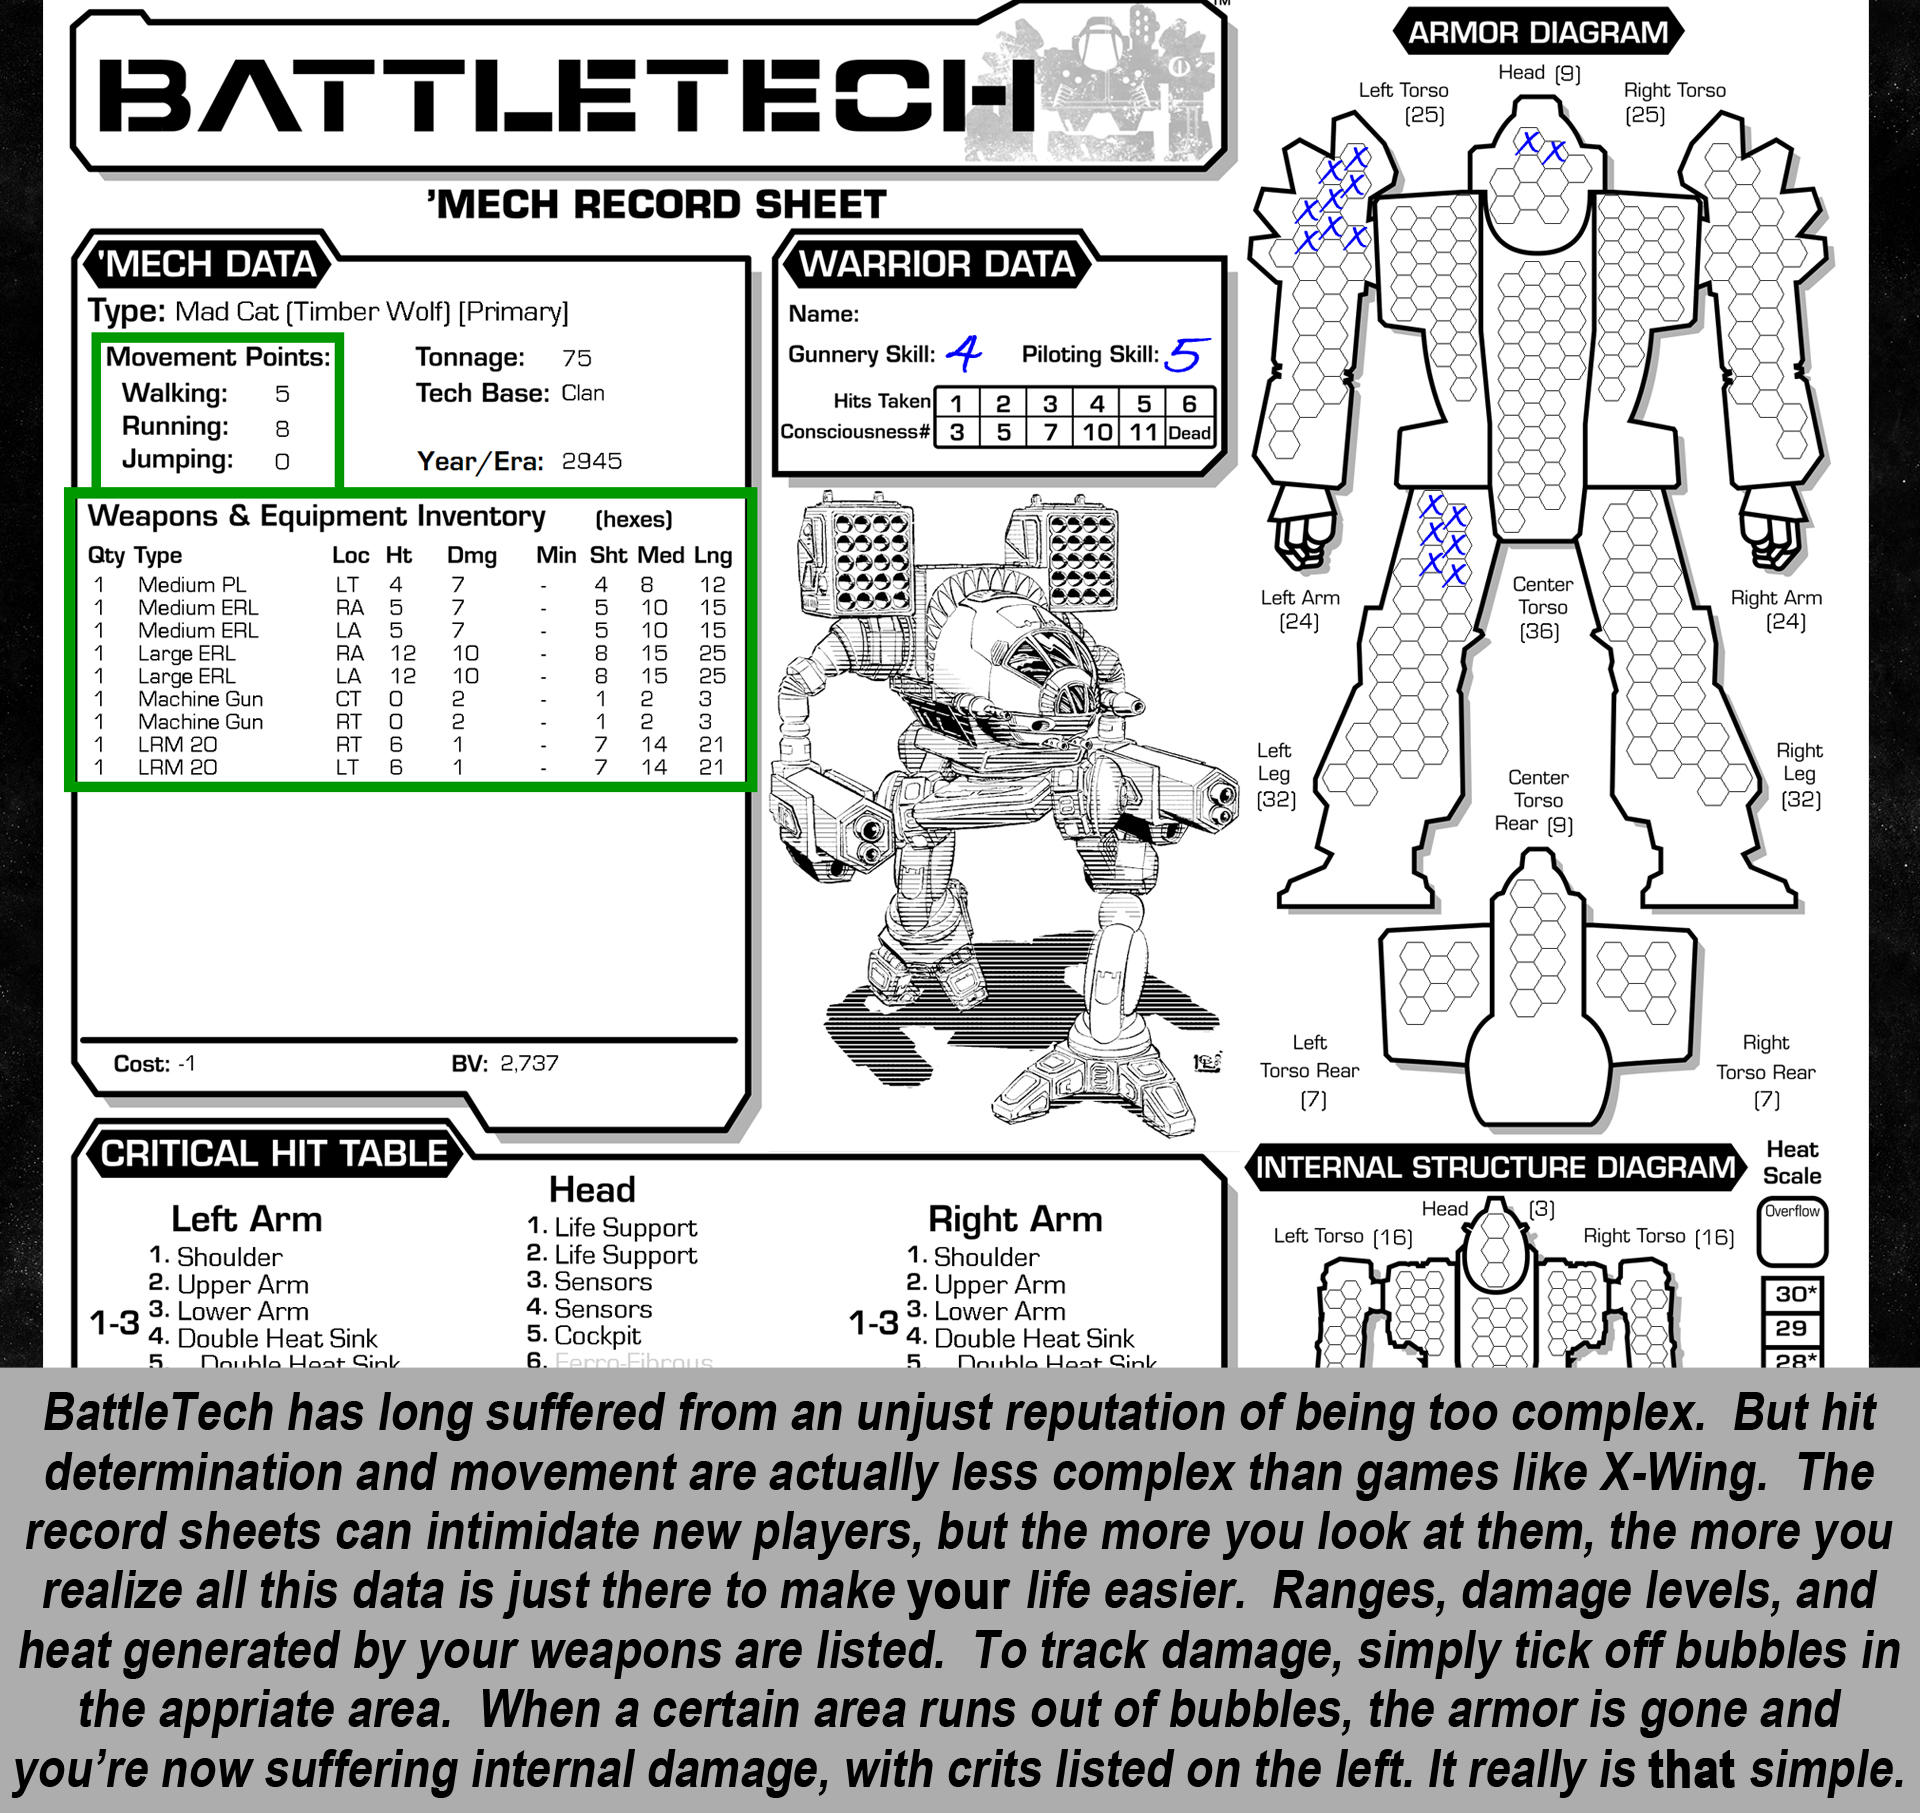 battletech tabletop succession wars record sheets